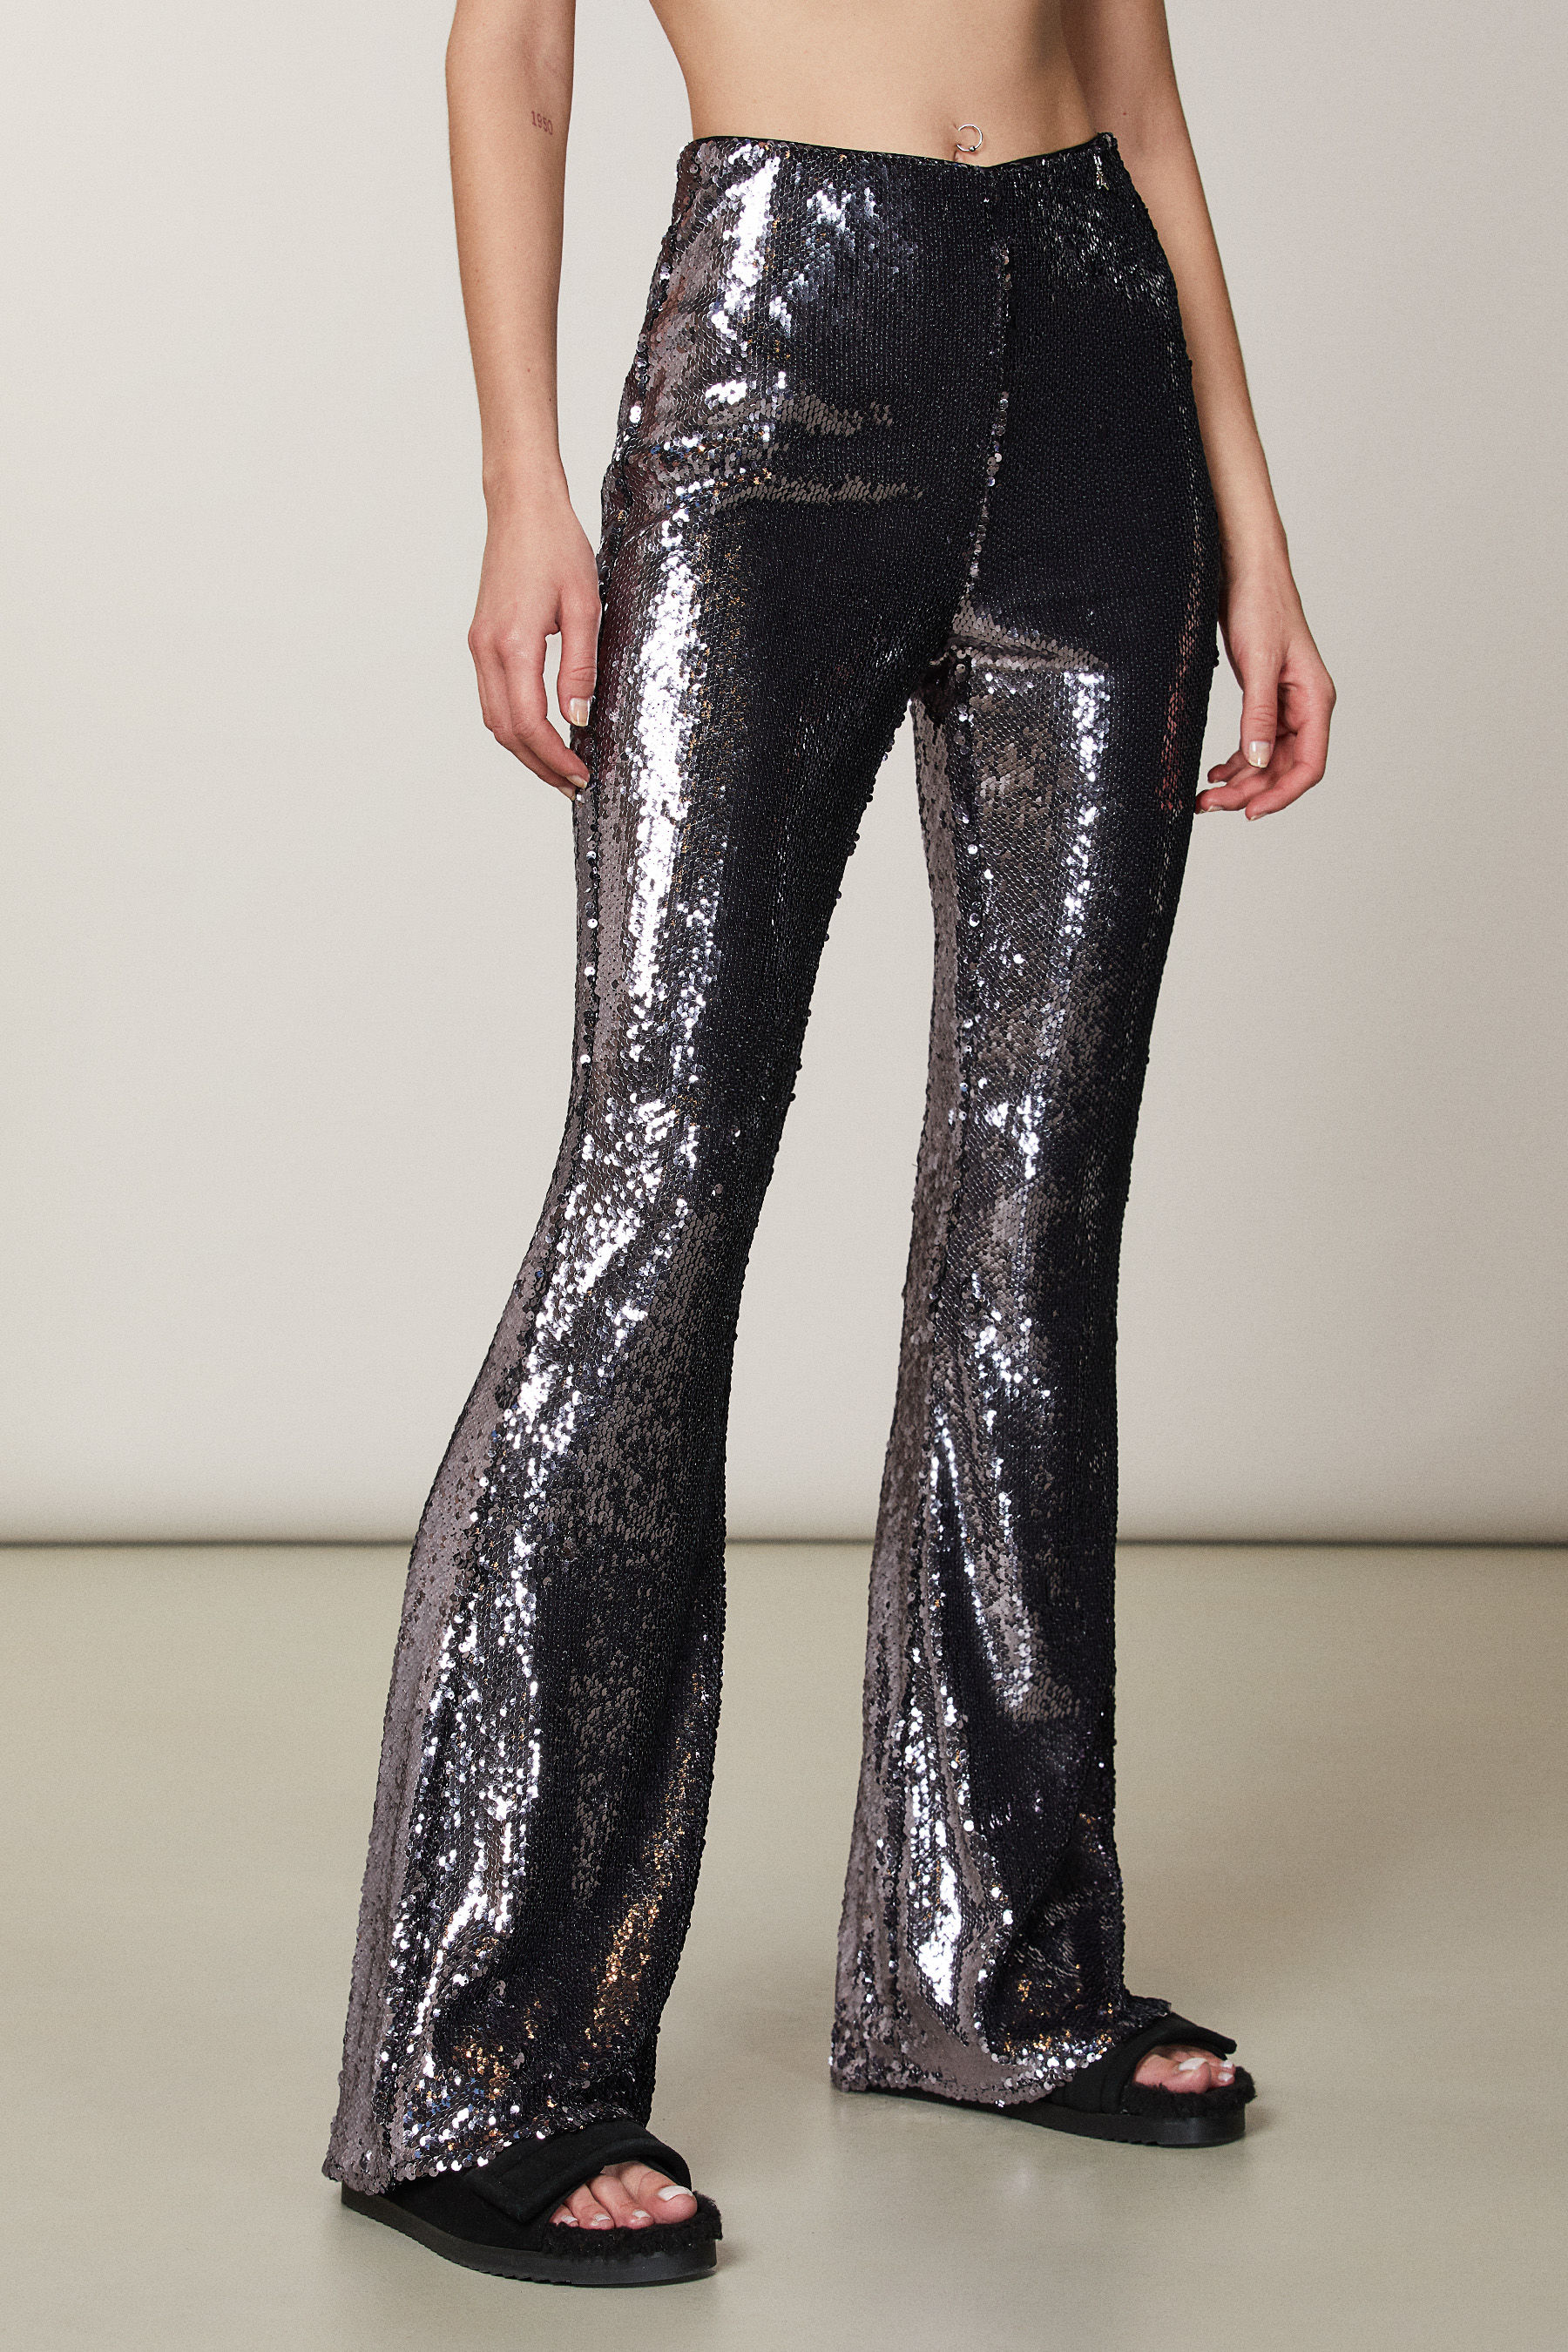 Sequin Silver Pants for Women for sale  eBay